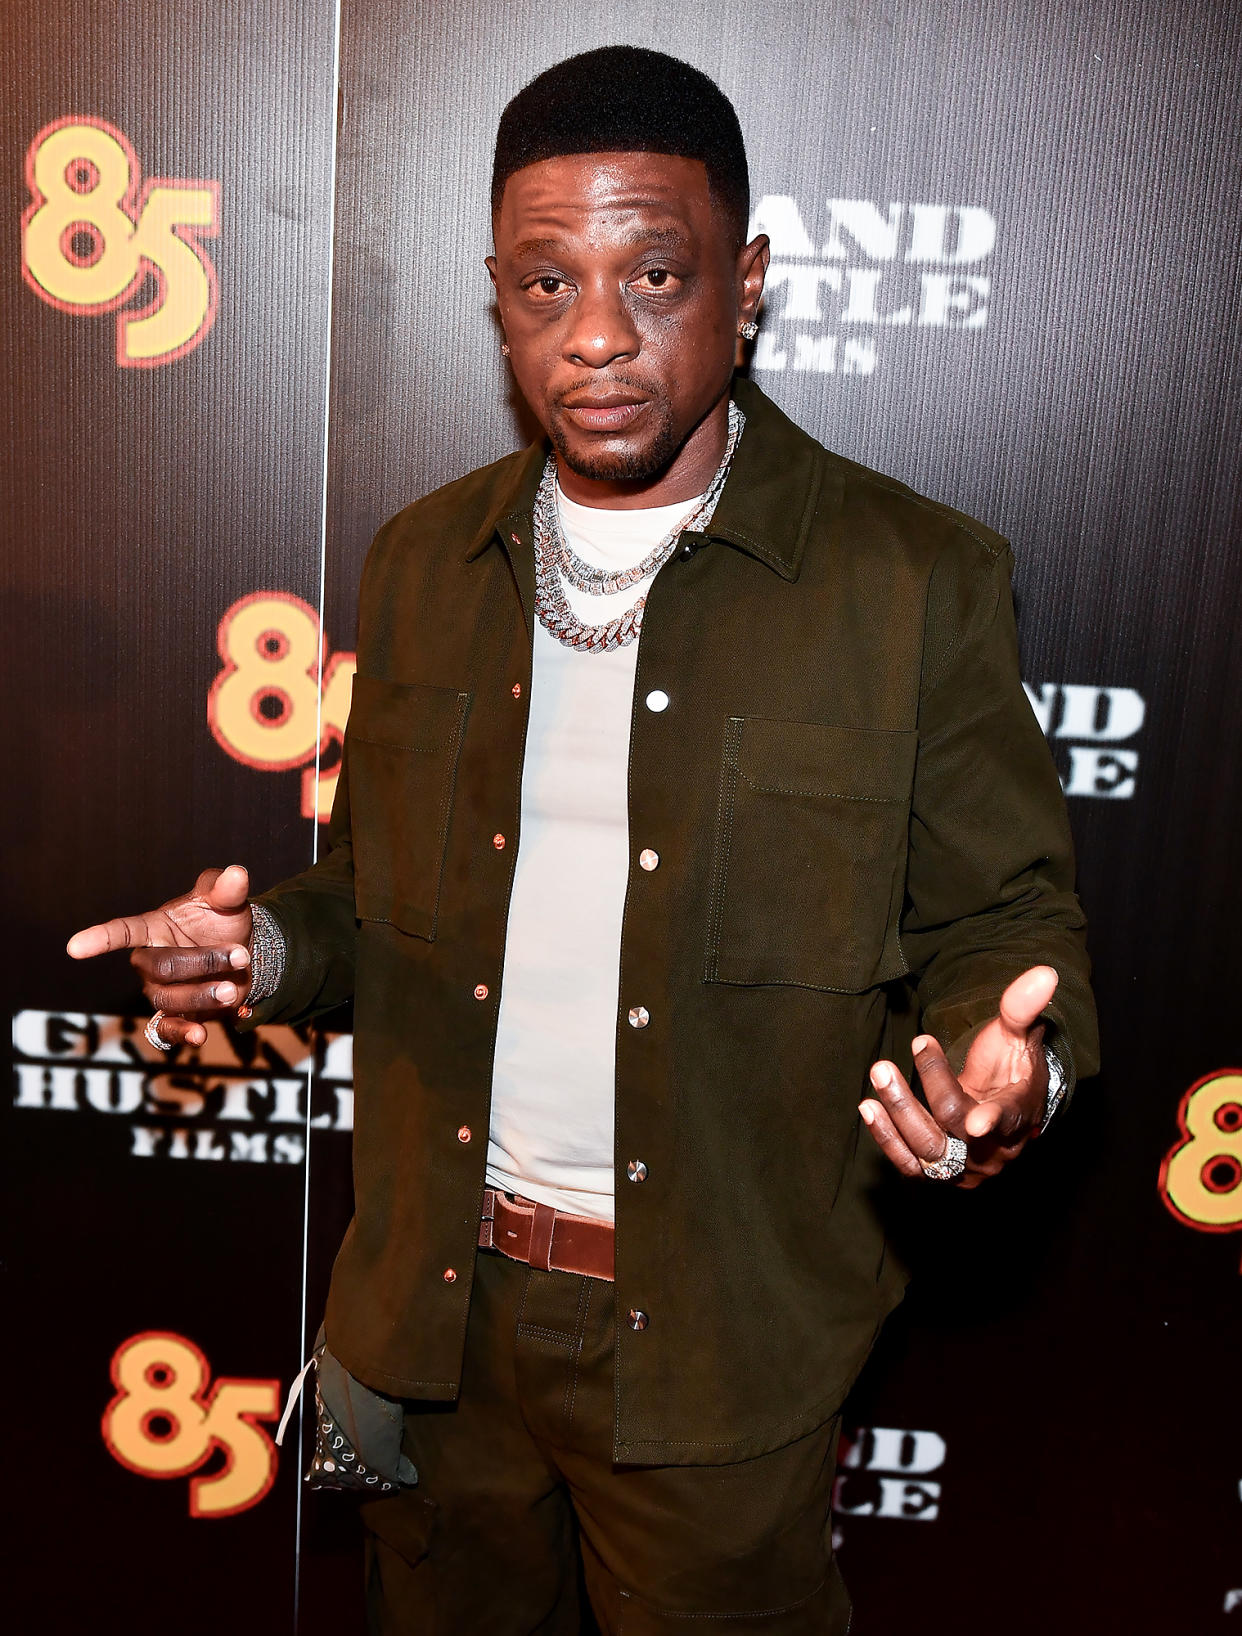 Rapper Boosie Slammed for Walking Out of ‘The Color Purple’ Over Lesbian Love Story: ‘Shut TF Up’